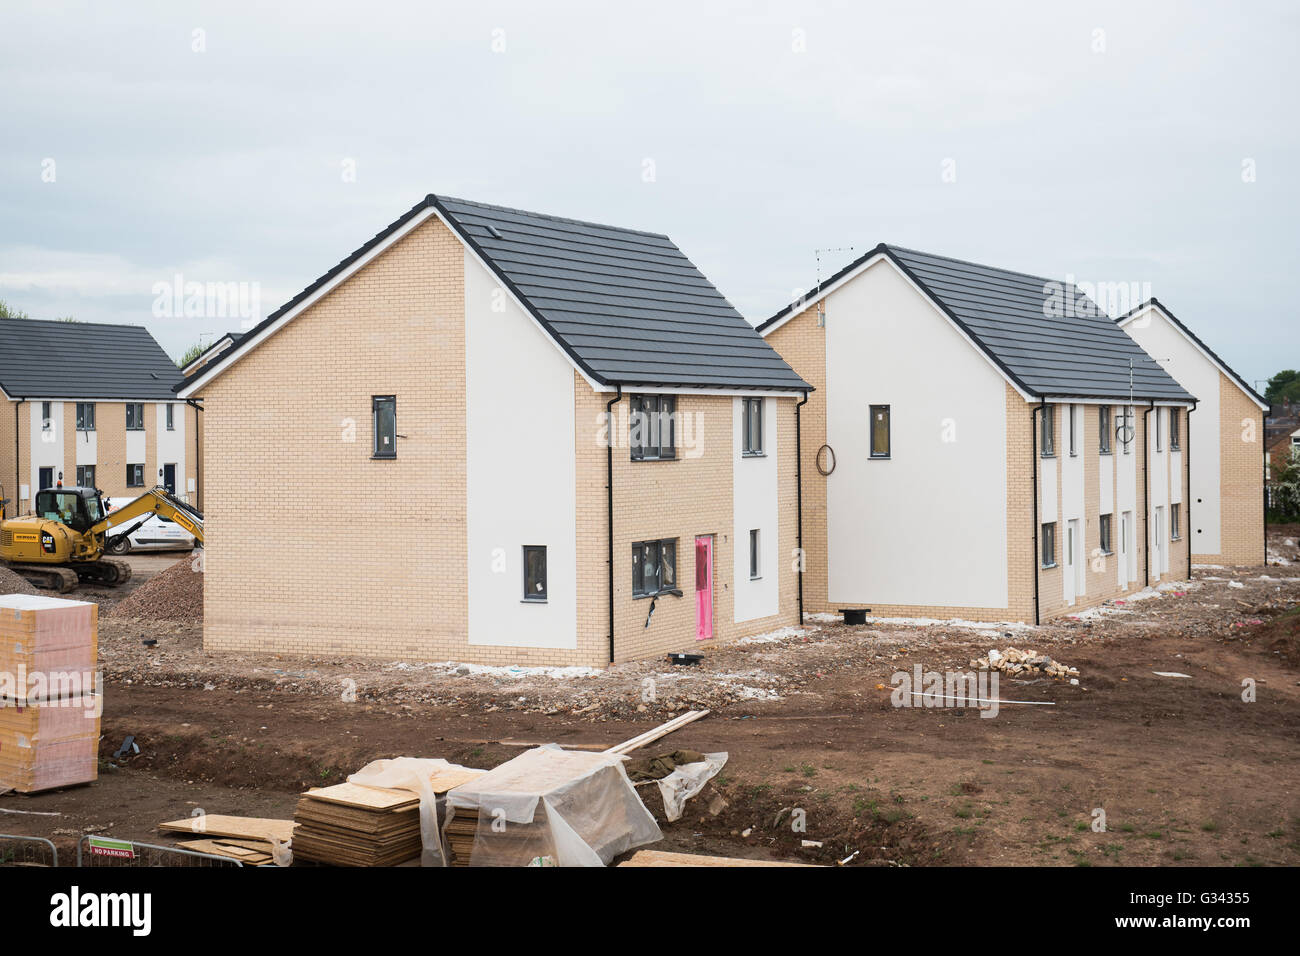 Pictures of construction of environmentally friendly, highly insulated new build homes where fuel bills are drastically reduced Stock Photo